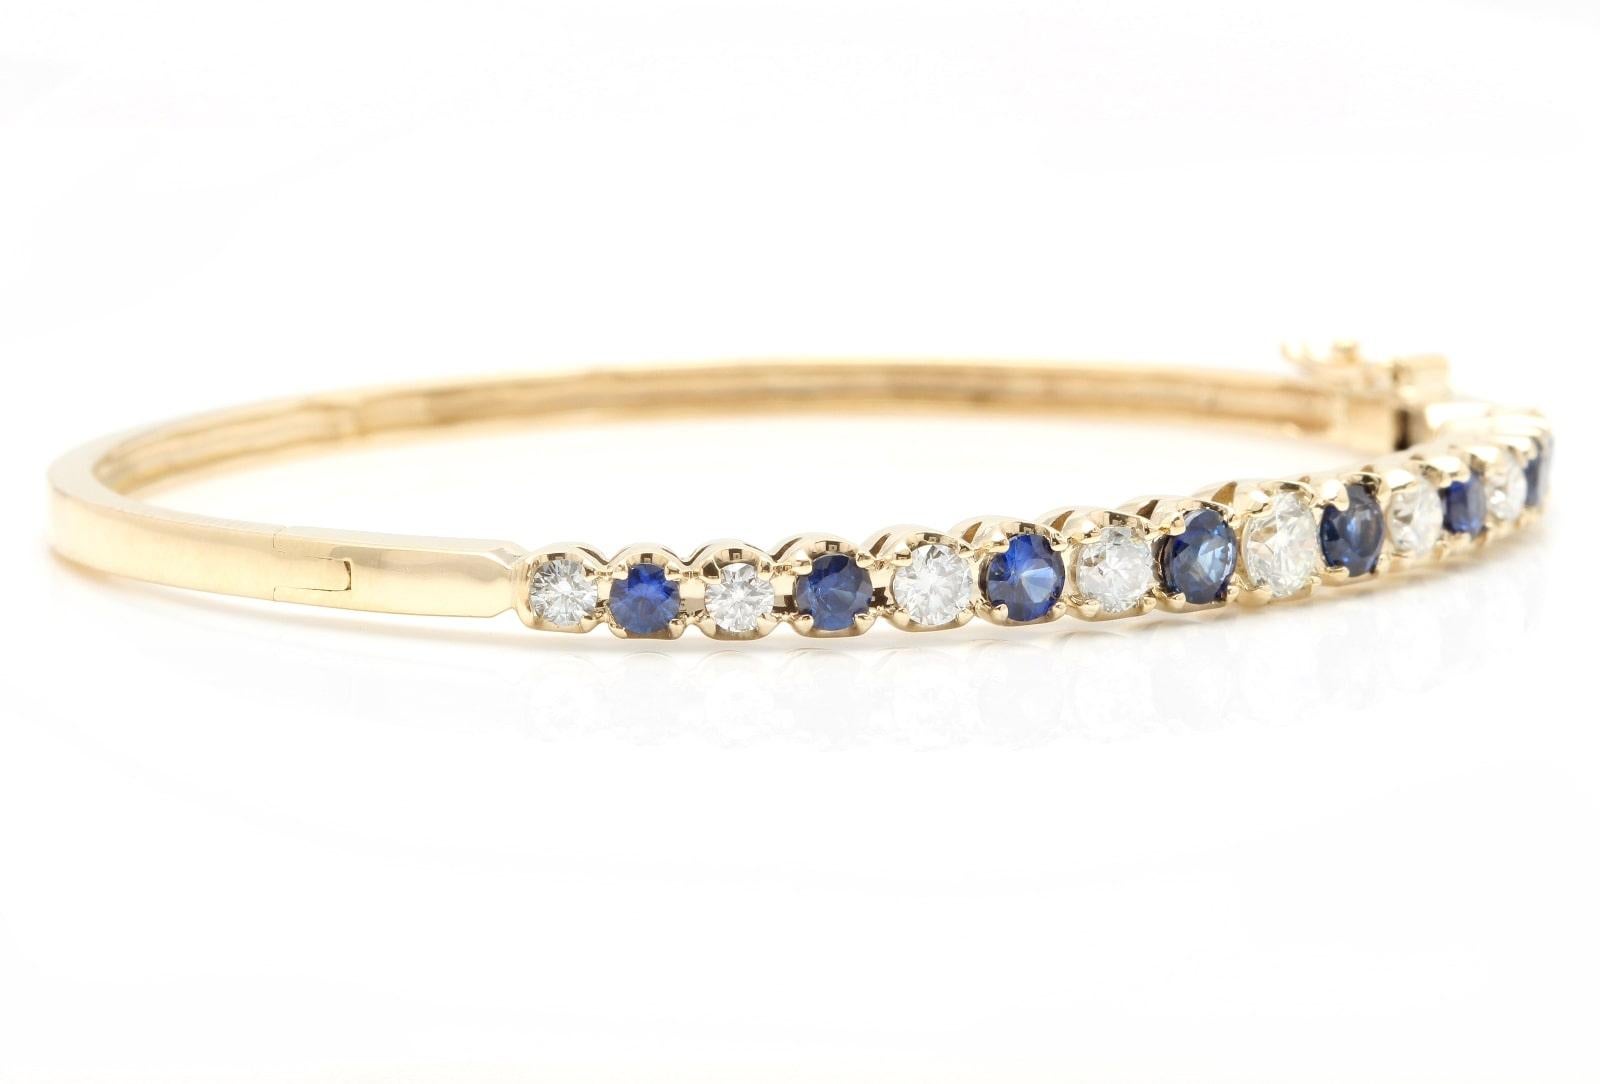 Very Impressive 4.00 Carats Natural Diamond and Sapphire 14K Solid Yellow Gold Bangle Bracelet 

Suggested Replacement Value: Approx. $9,000.00

STAMPED: 14K

Total Natural Round Diamonds Weight: Approx. 1.70 Carats (color G-H / Clarity SI1)

Center